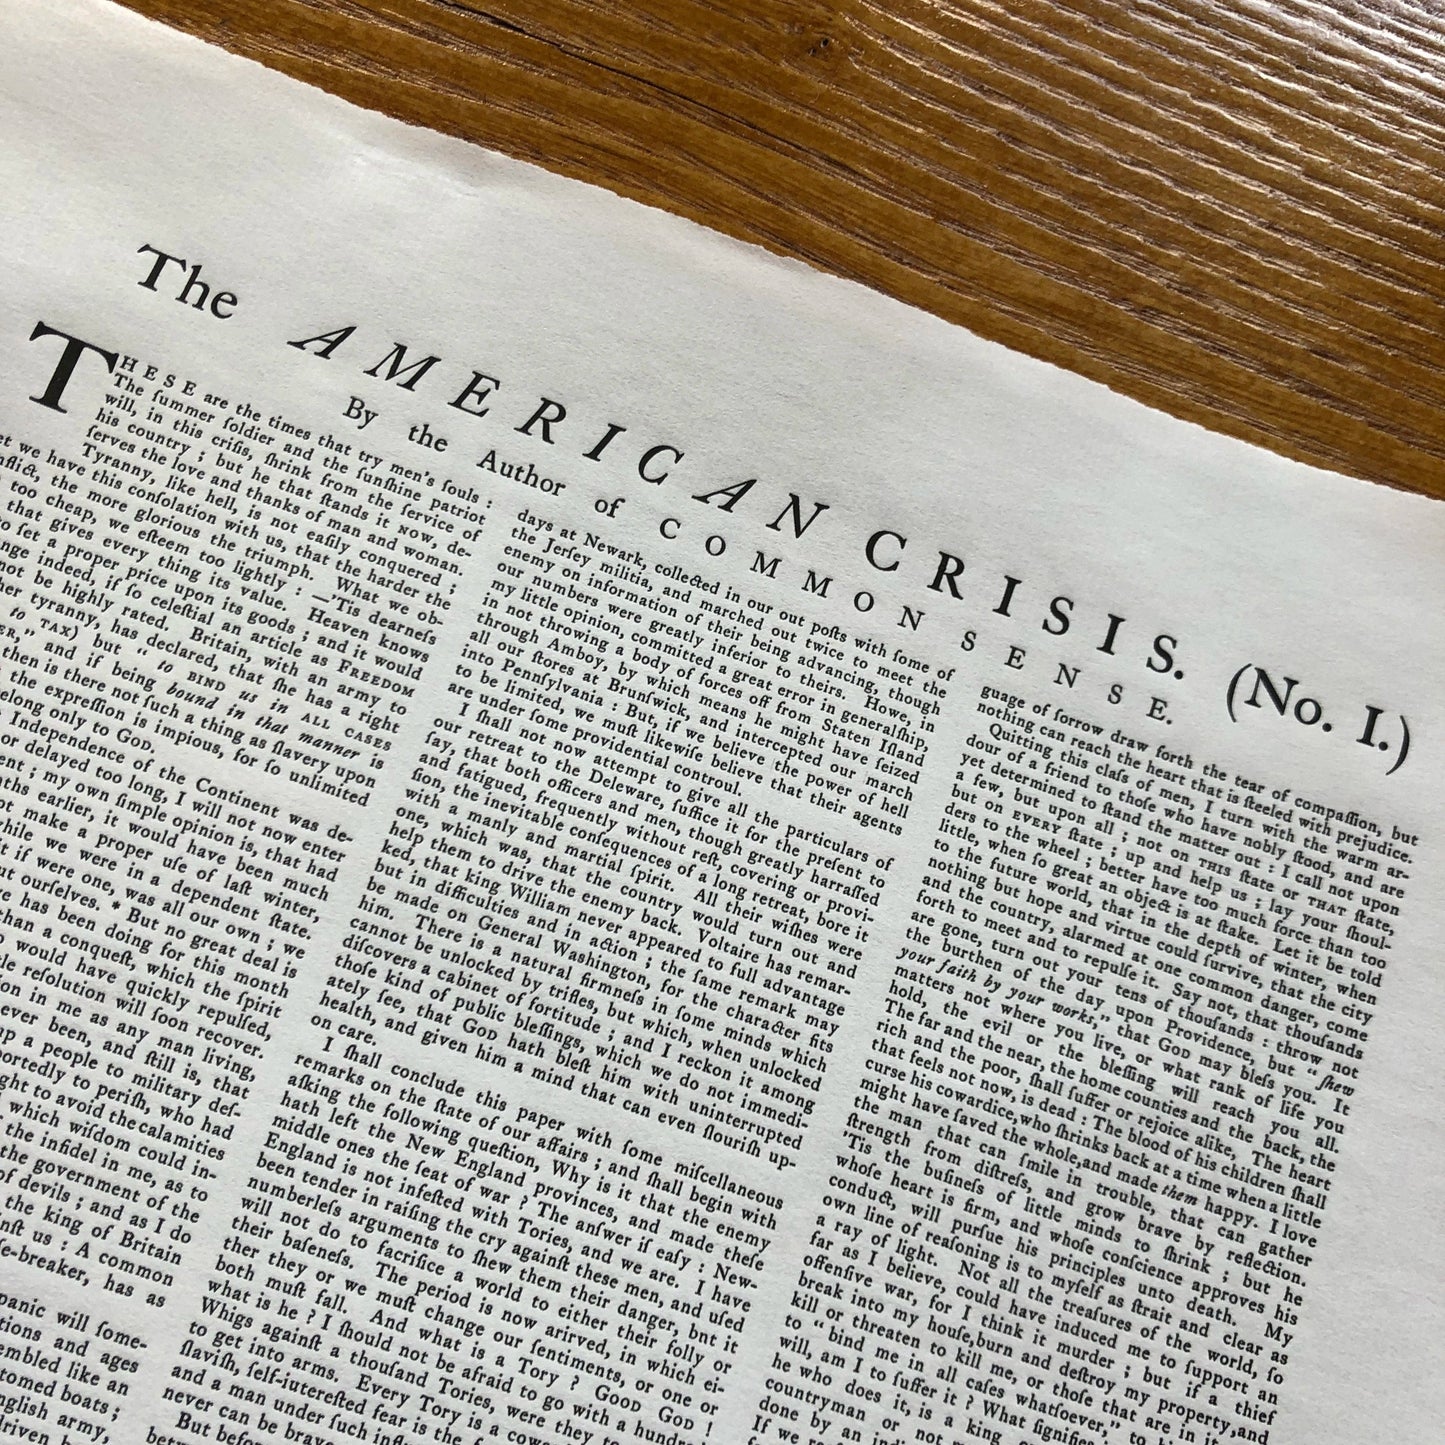 "The American Crisis" by Thomas Paine - "These are the times that try men’s souls" - Broadside printed in Boston